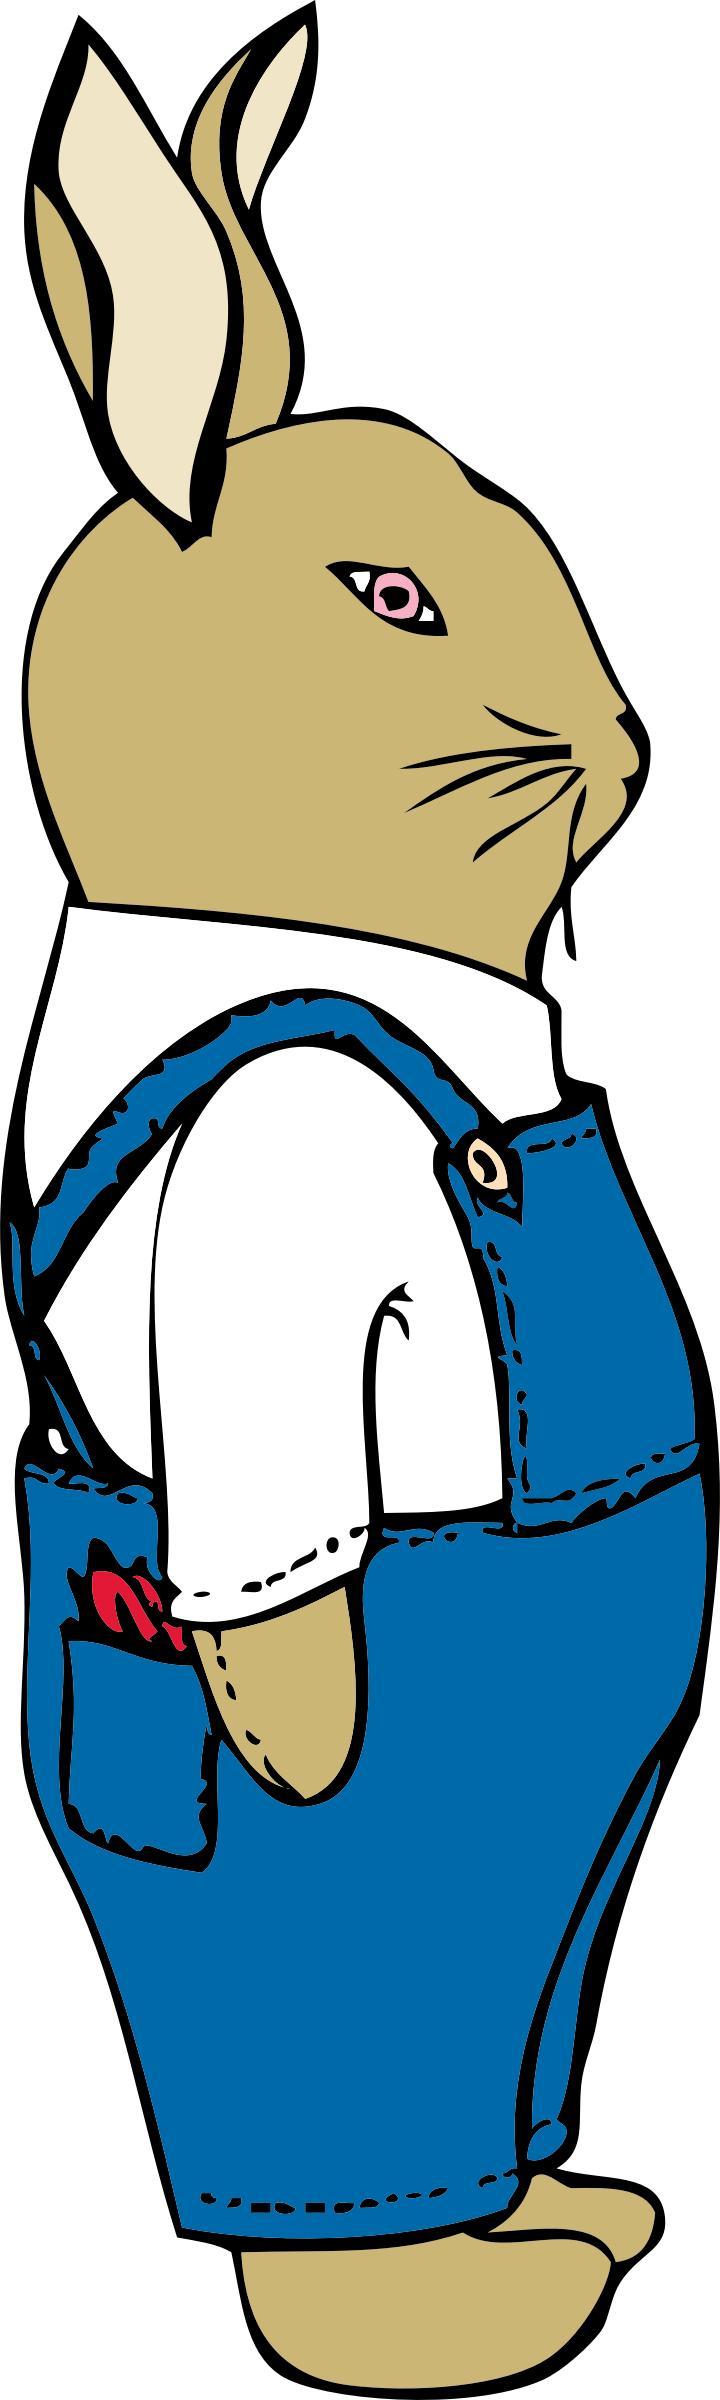 bunny in overalls png transparent